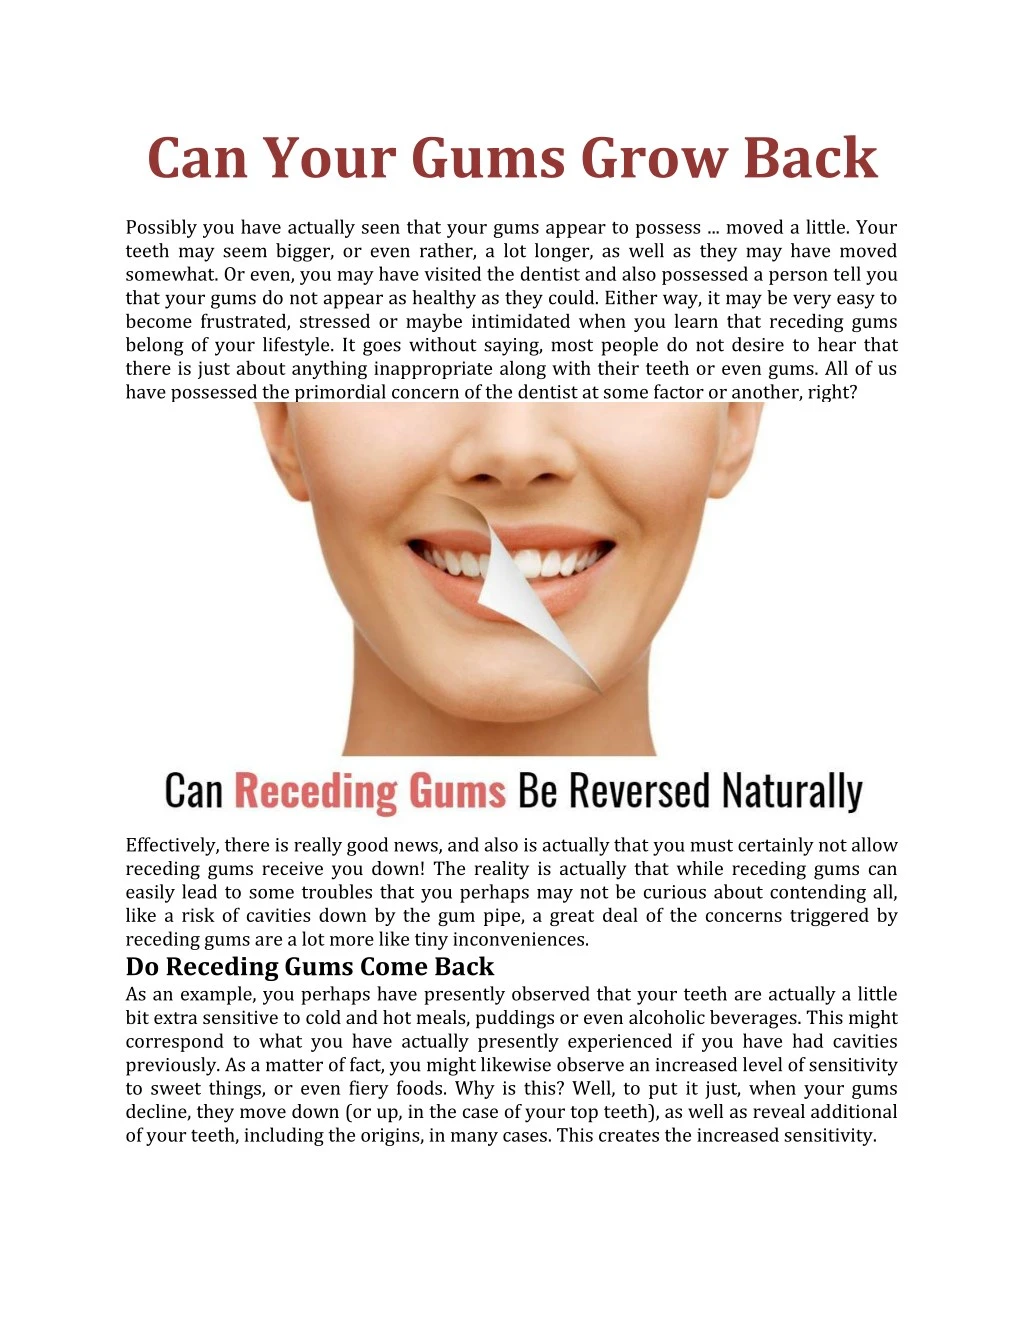 can your gums grow back